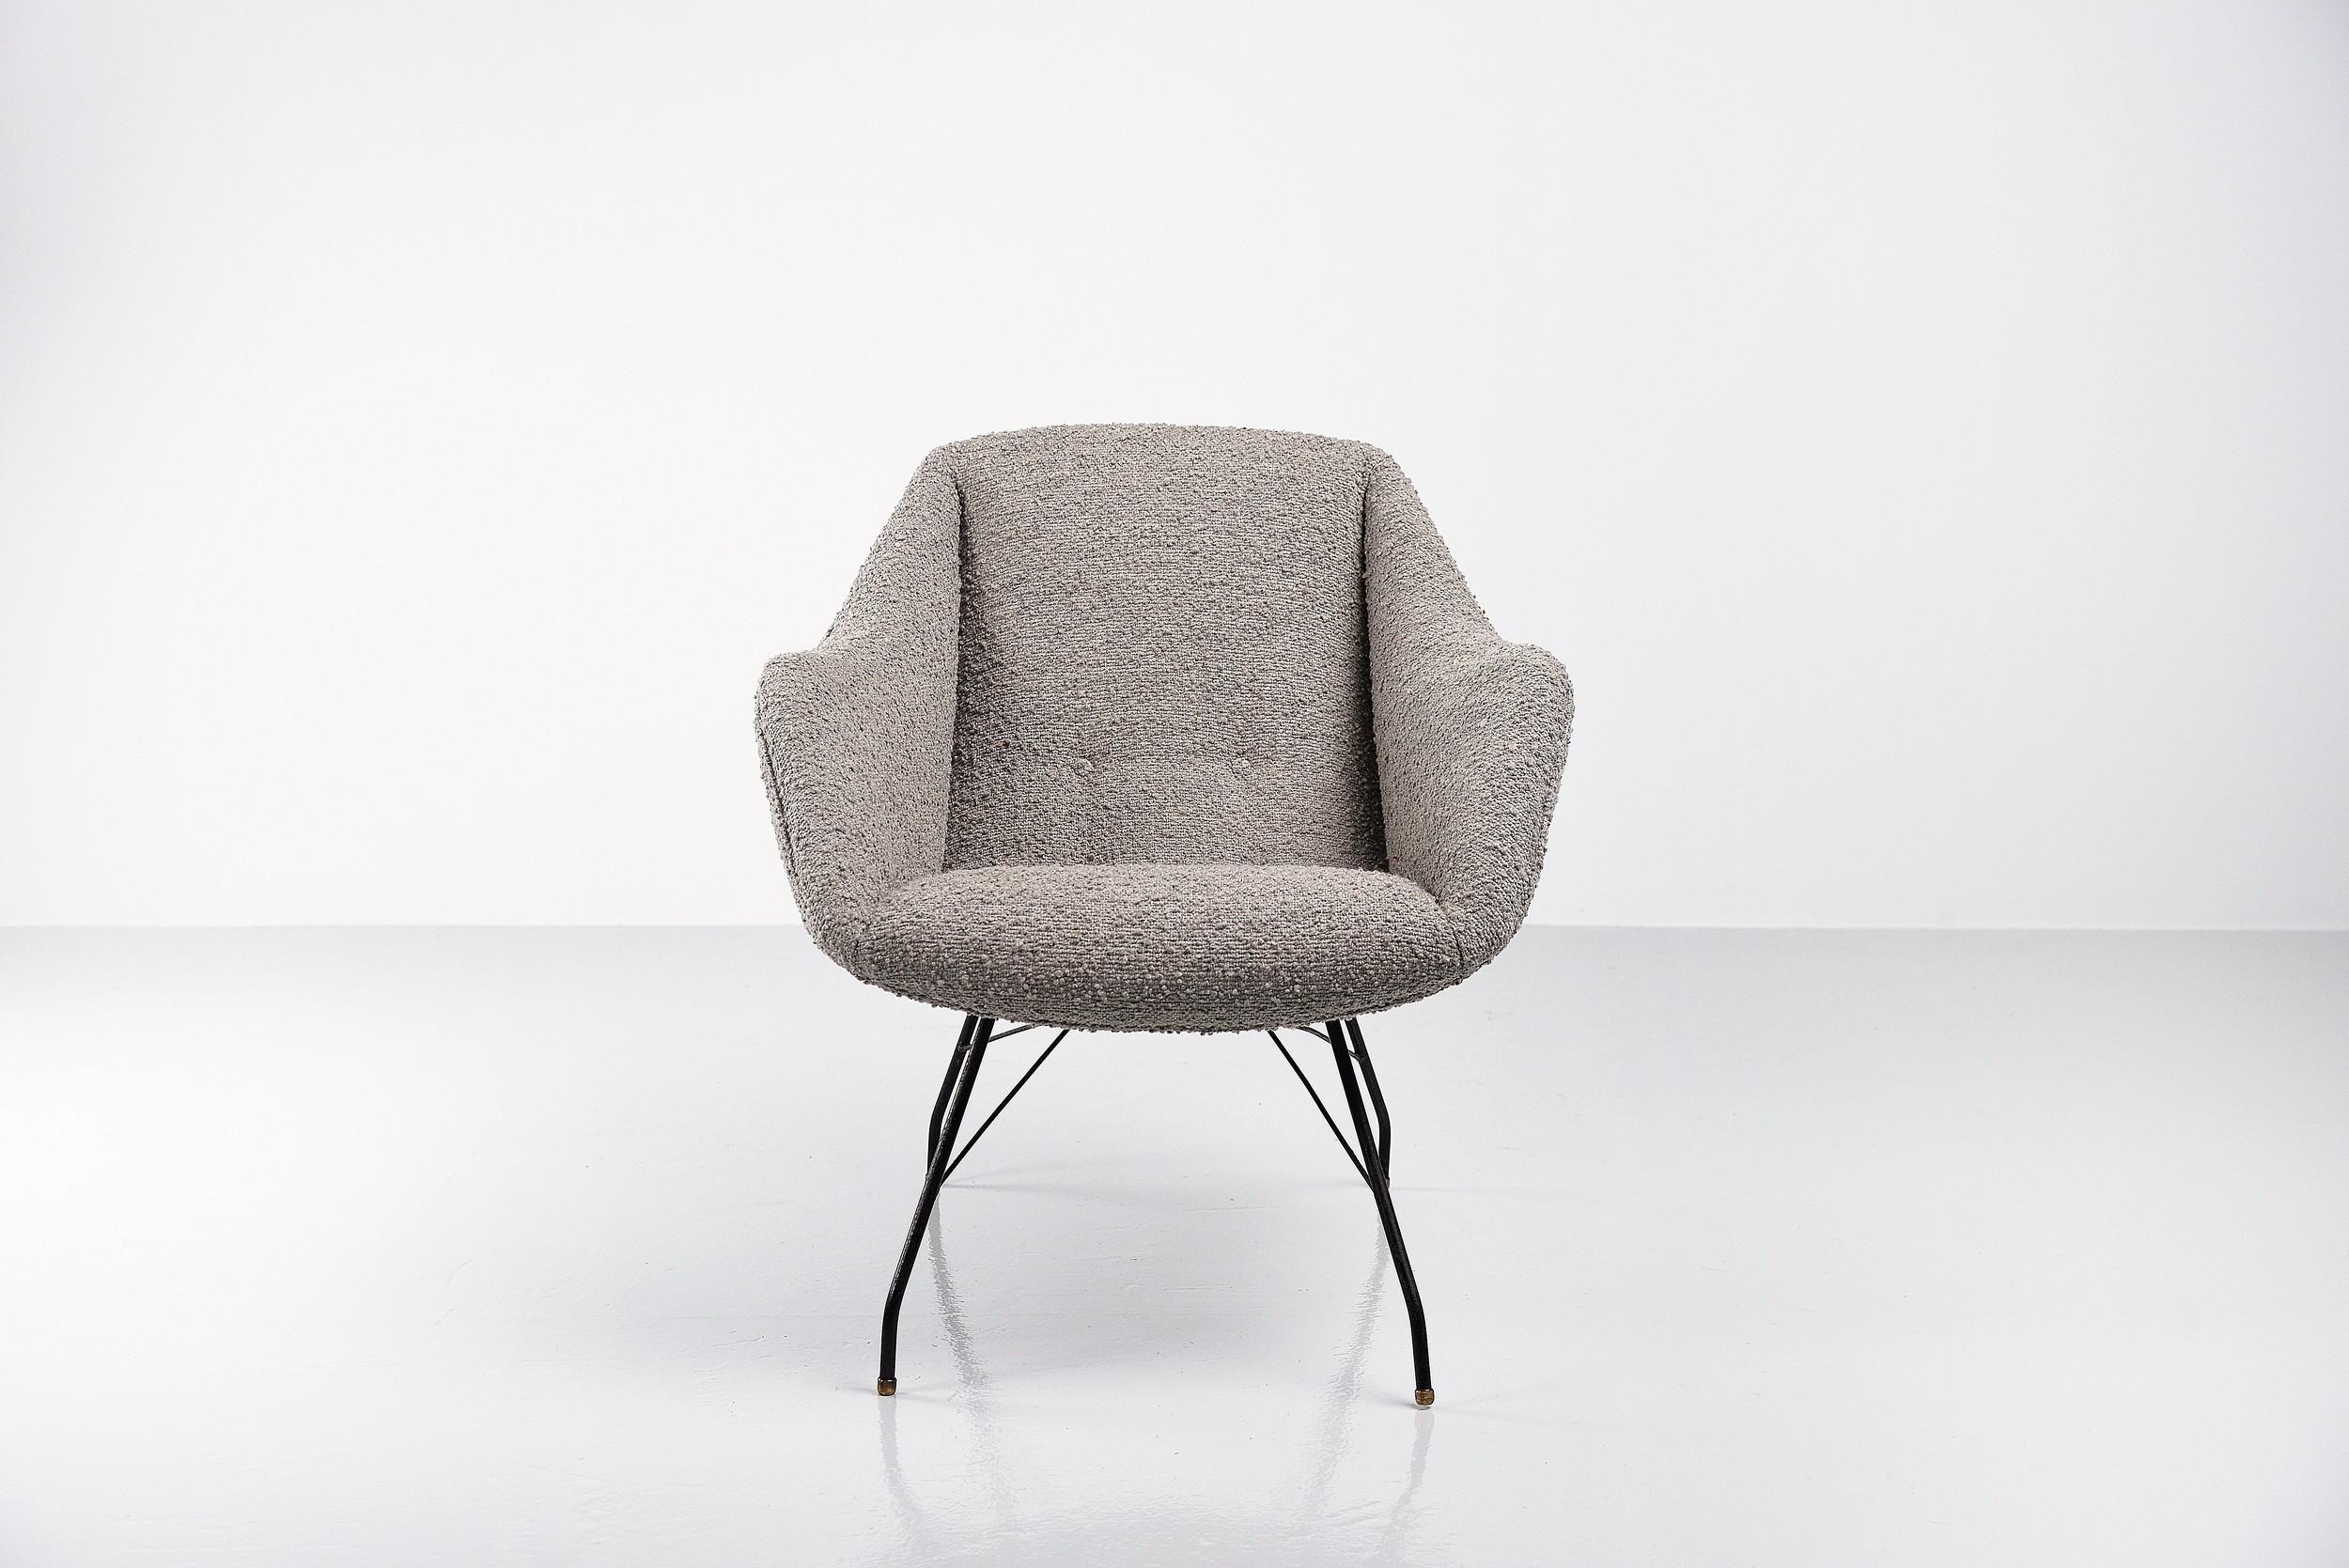 Stunning and comfortable ‘Concha’ (shell) lounge chair designed by Carlo Hauner and Martin Eisler and manufactured by Forma Moveis, Brazil 1950. This chair has a solid steel structure and newly upholstered shell seat in grey bouclé fabric. As you